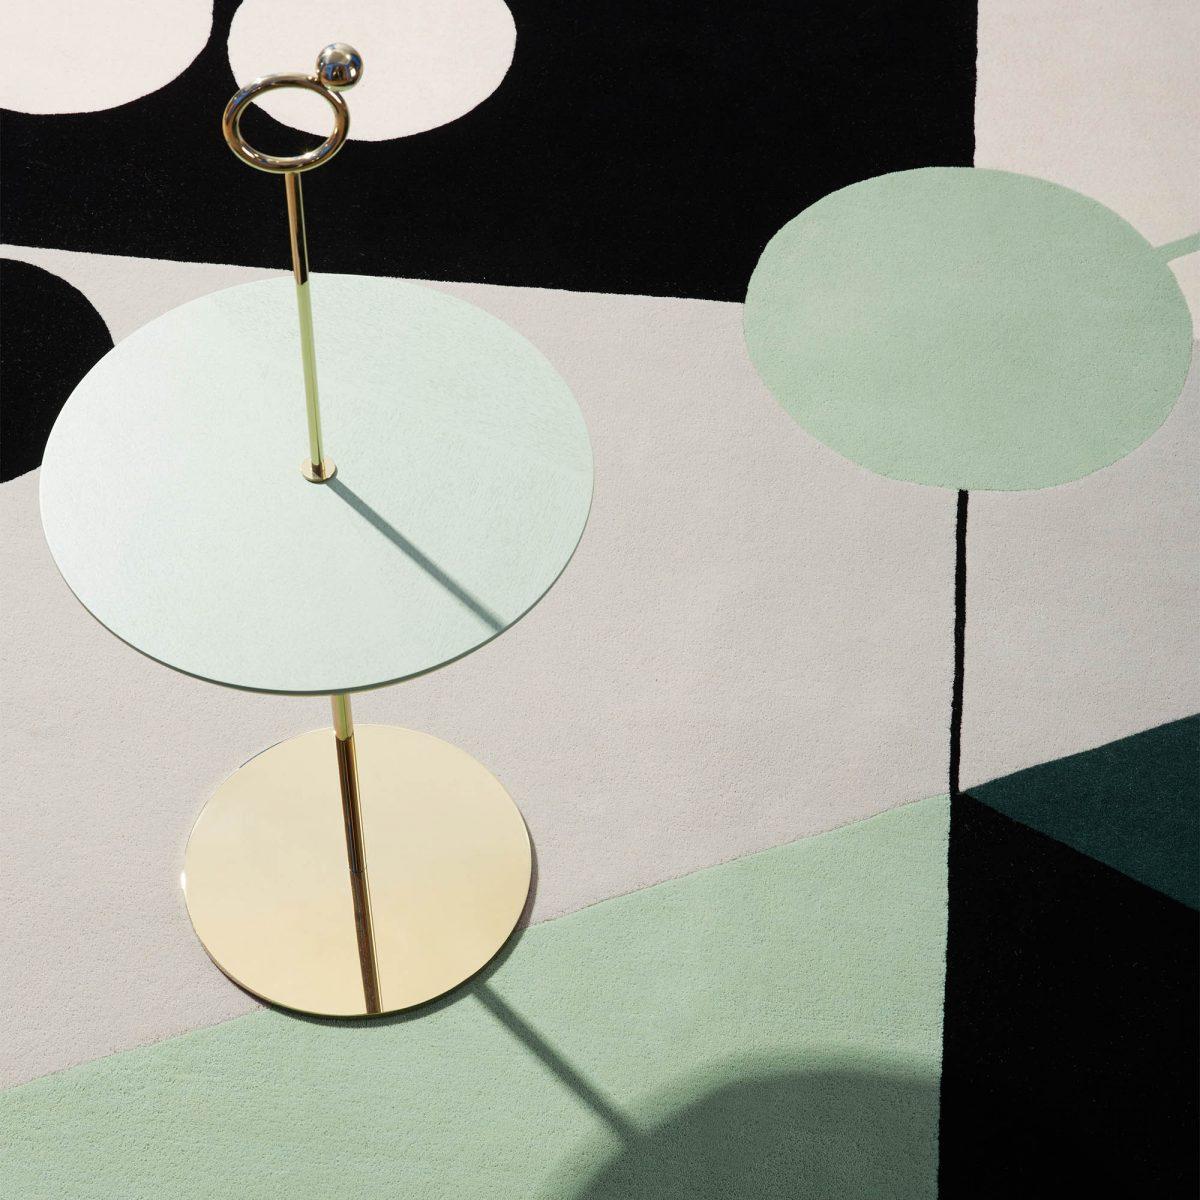 French Off the Moon N°1 Side Table by Thomas Dariel